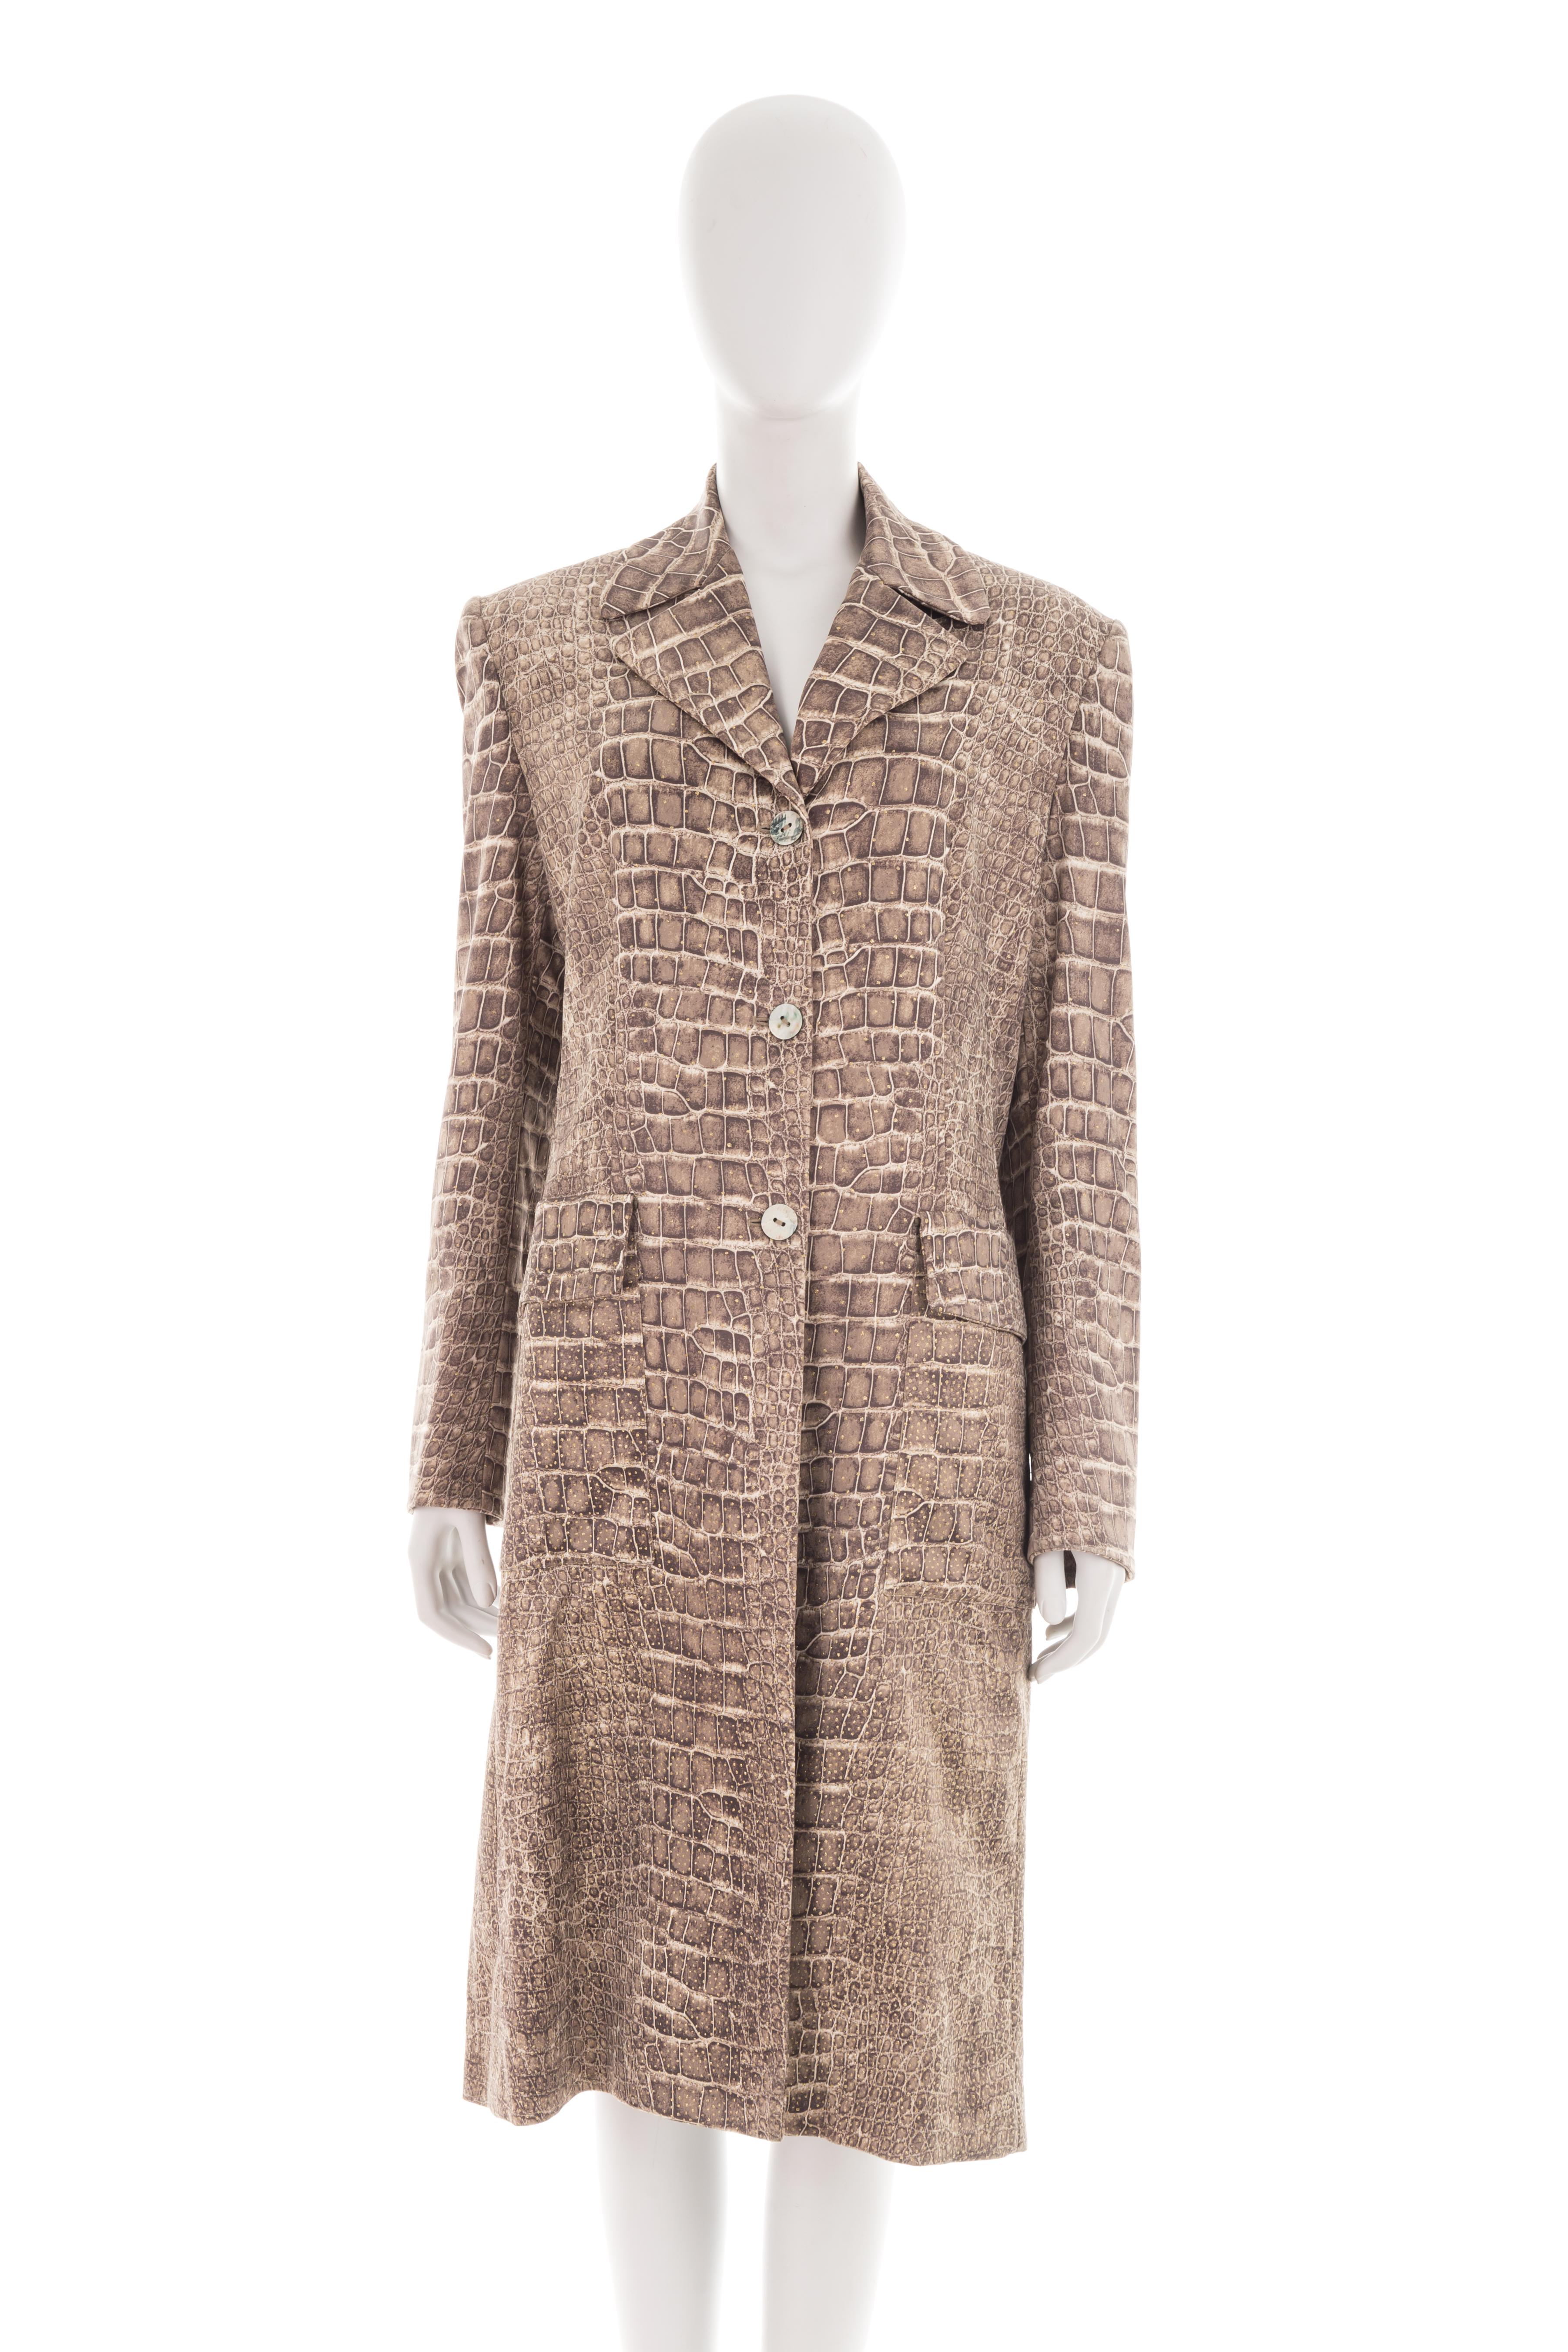 - Fall-winter 1998 collection
- Sold by Gold Palms Vintage
- Brown croc print with golden spots allover 
- Silk trench coat
- Large notch lapels and collar
- Mother of pearl front buttons
- Front pockets
- Additional belt
- Size: M
